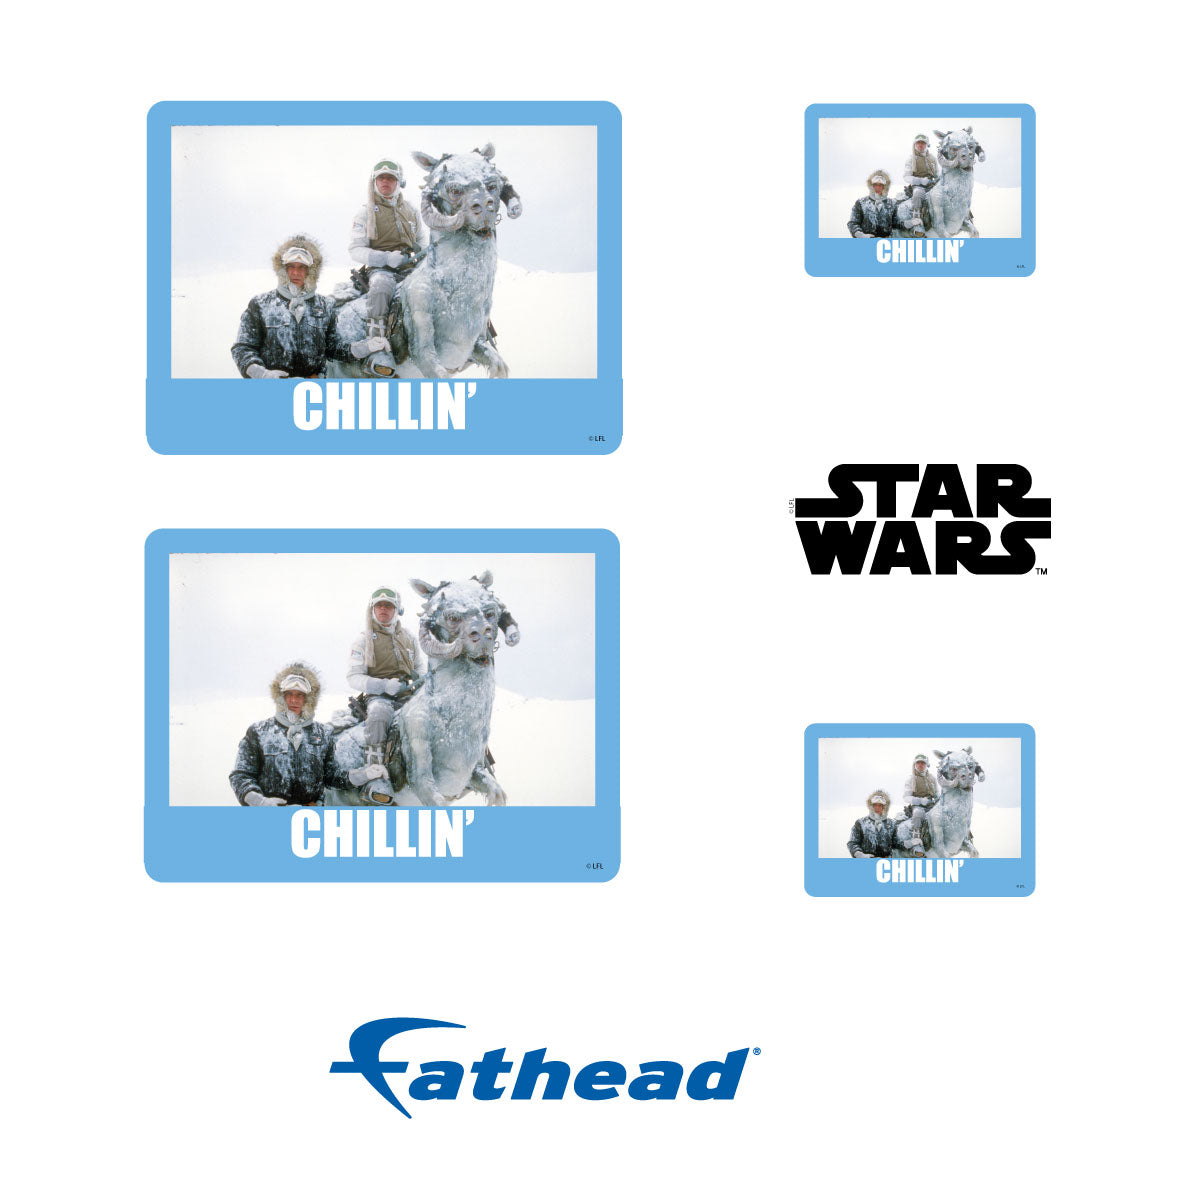 Chillin' meme Minis        - Officially Licensed Star Wars Removable     Adhesive Decal